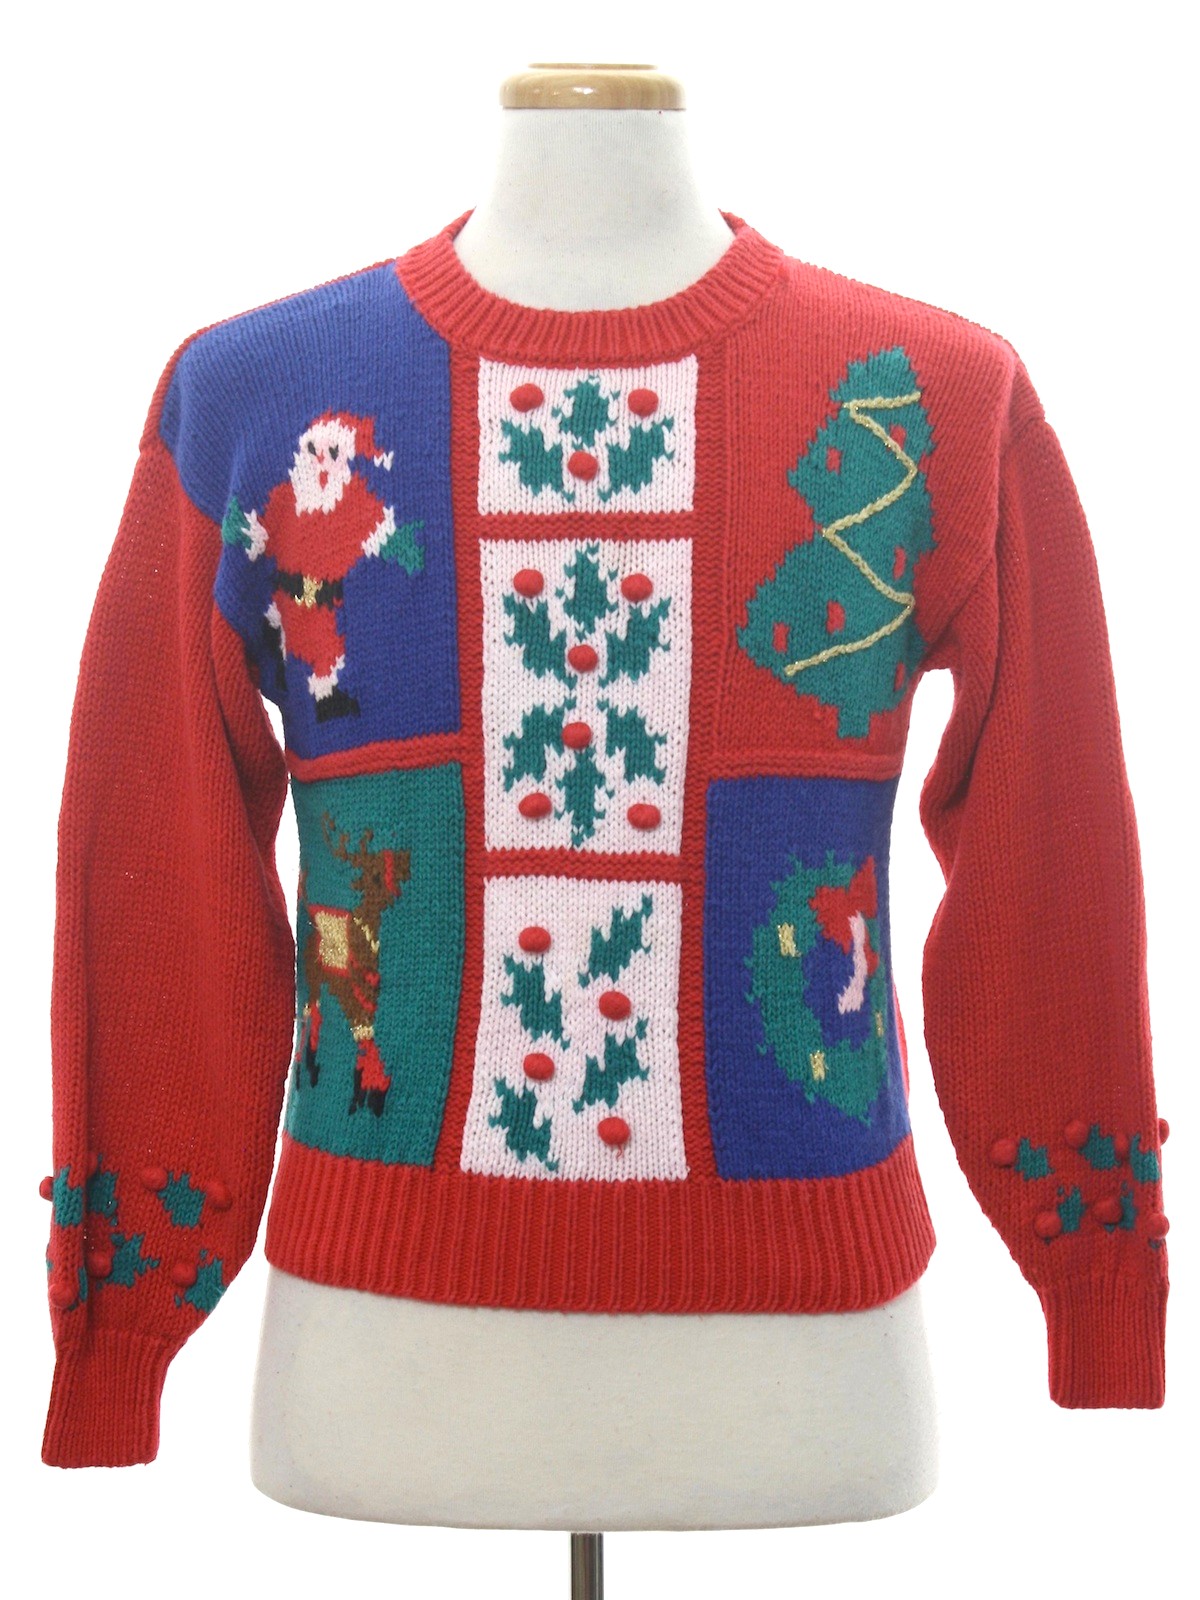 Womens Ugly Christmas Sweater: retro look -Copper Key- Womens red ...